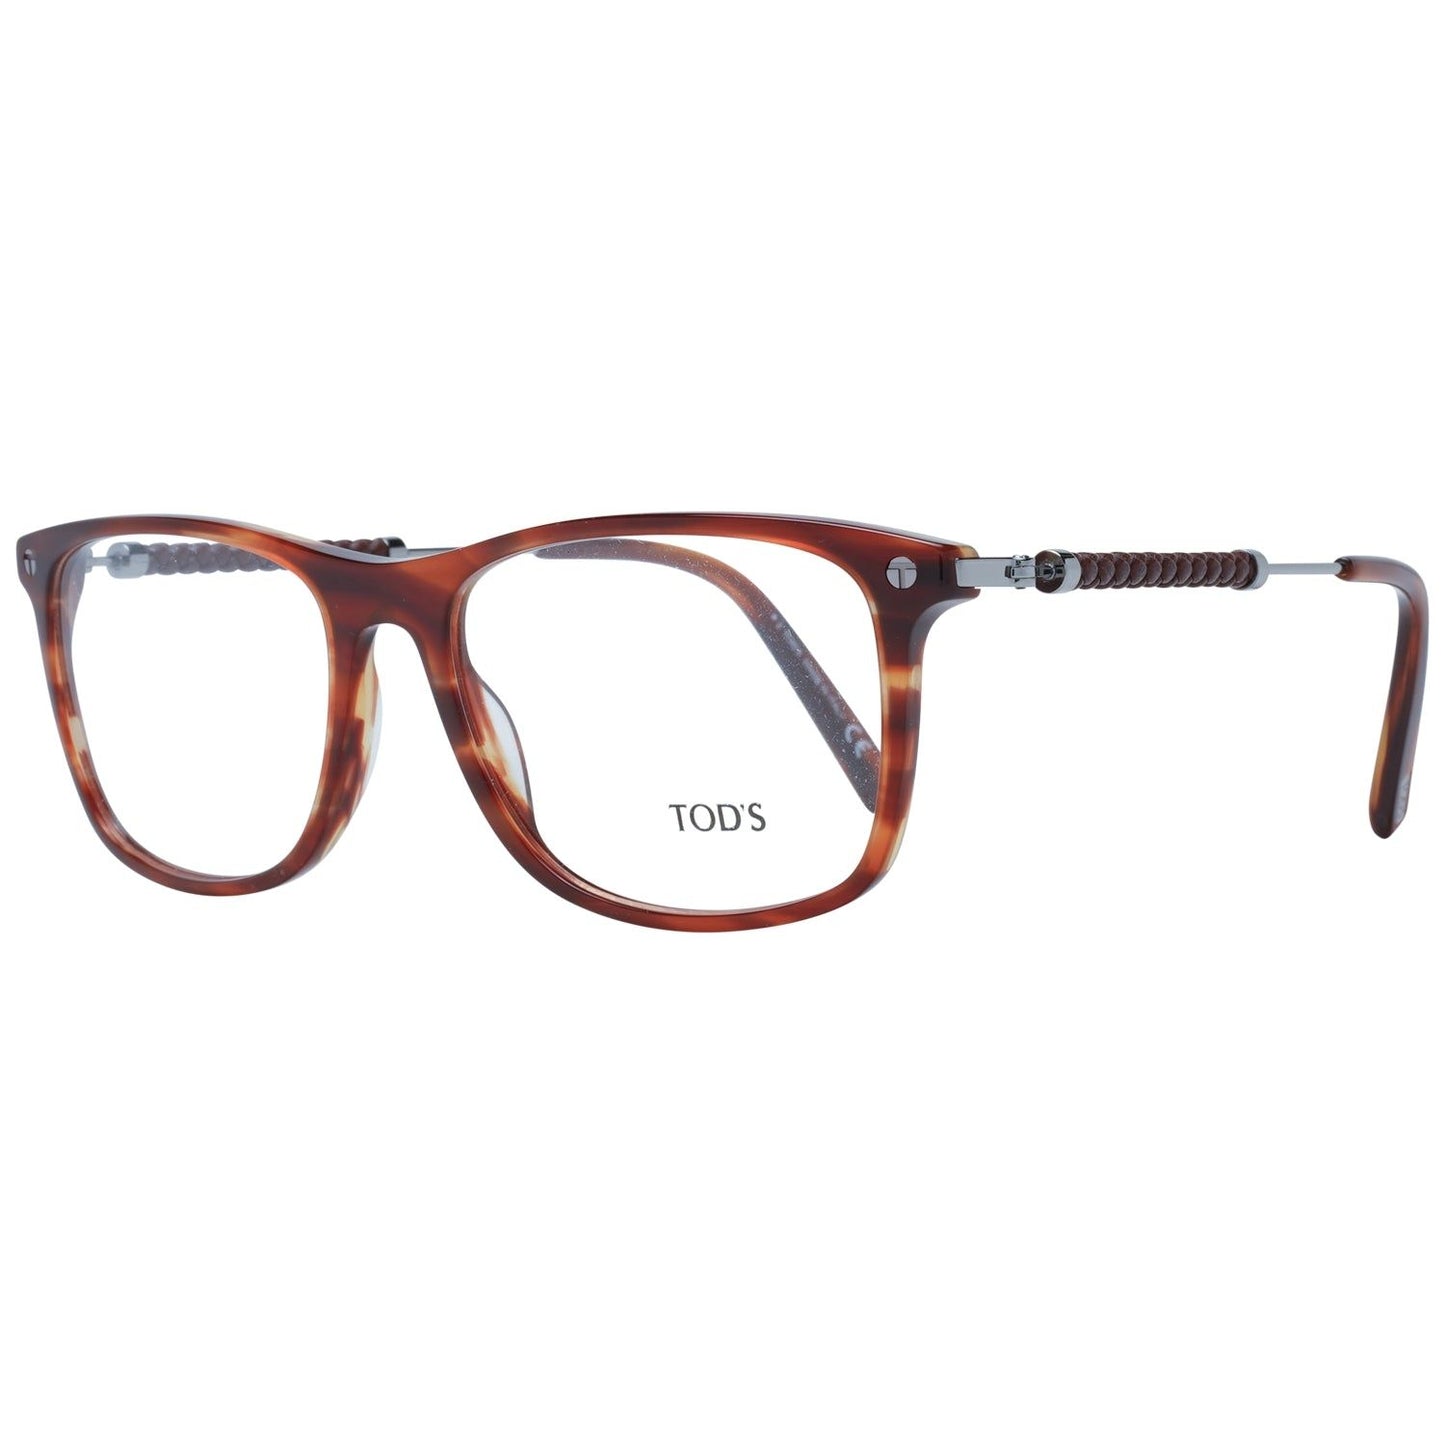 TODS FRAME TODS MOD. TO5266 56053 SUNGLASSES & EYEWEAR tods-mod-to5266-56053